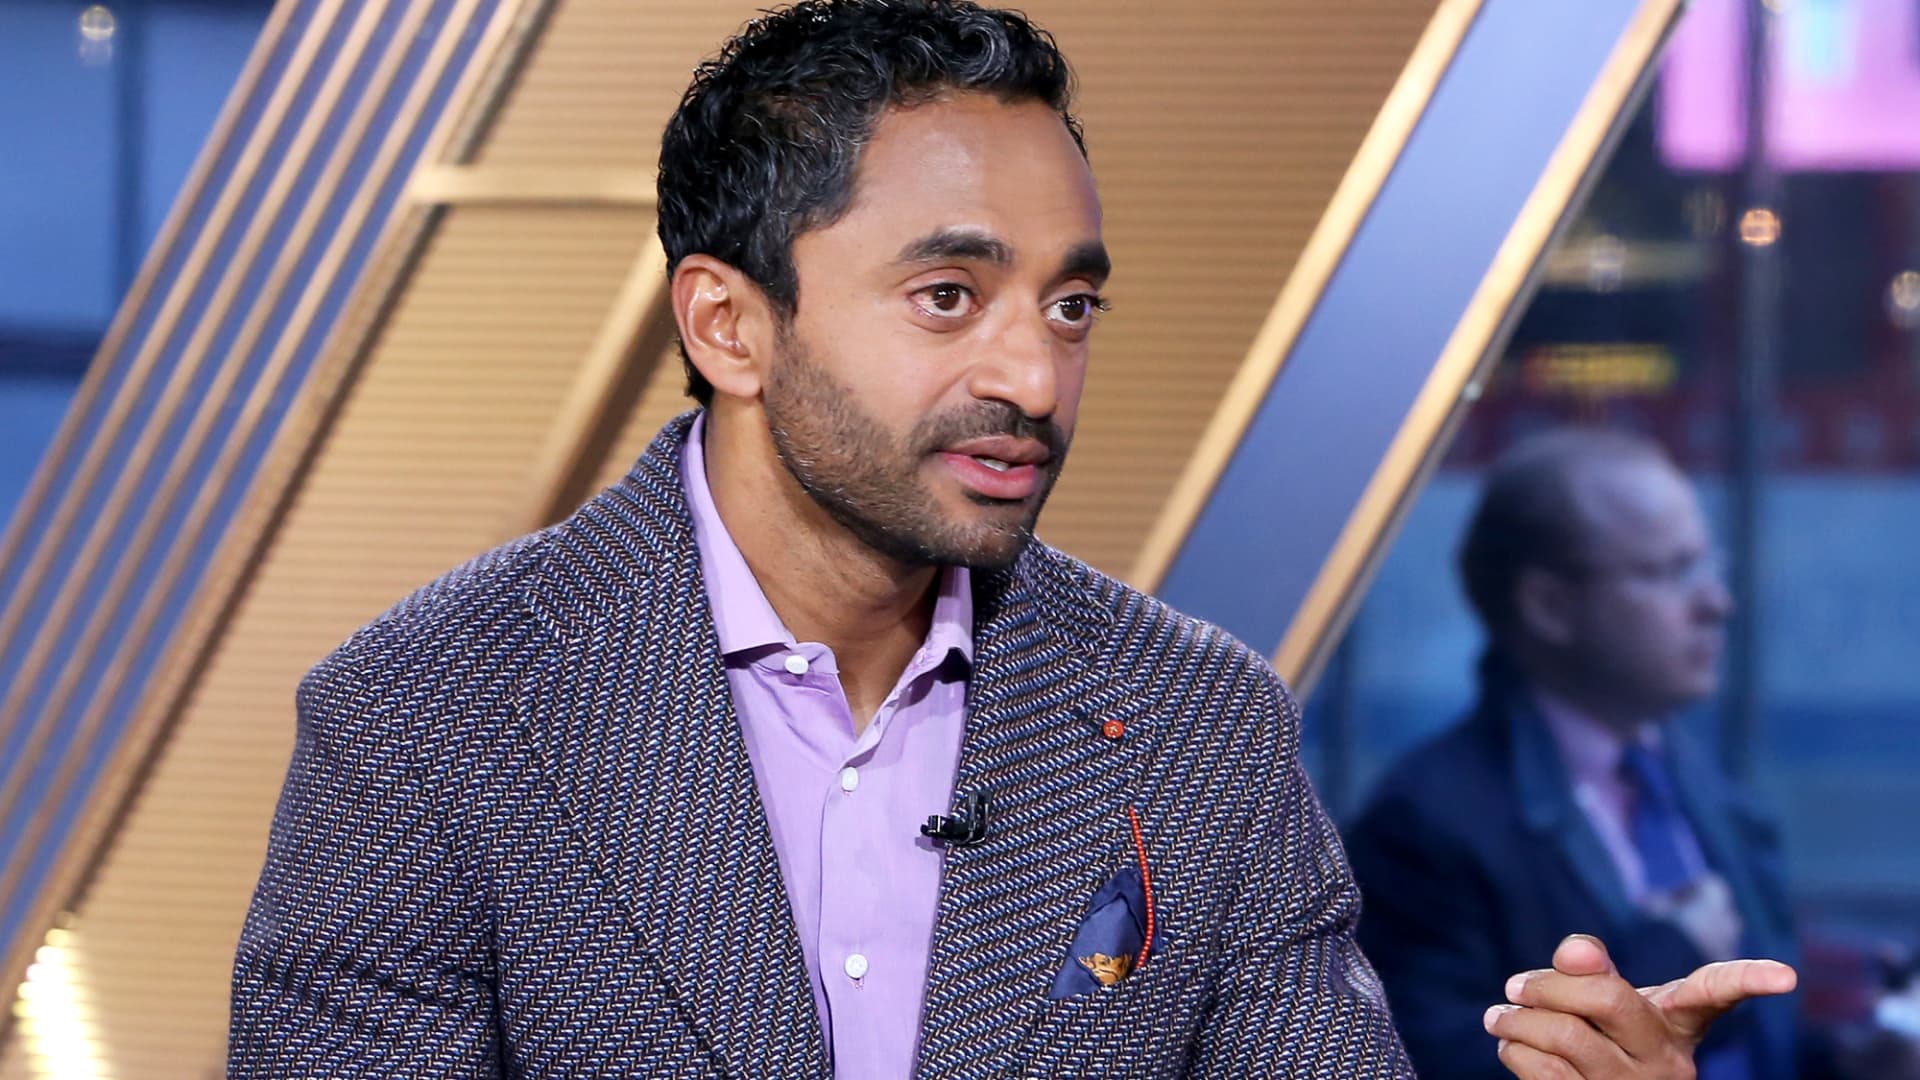 Chamath Palihapitiya blames the Fed for 'perverted' market conditions that benefitted him